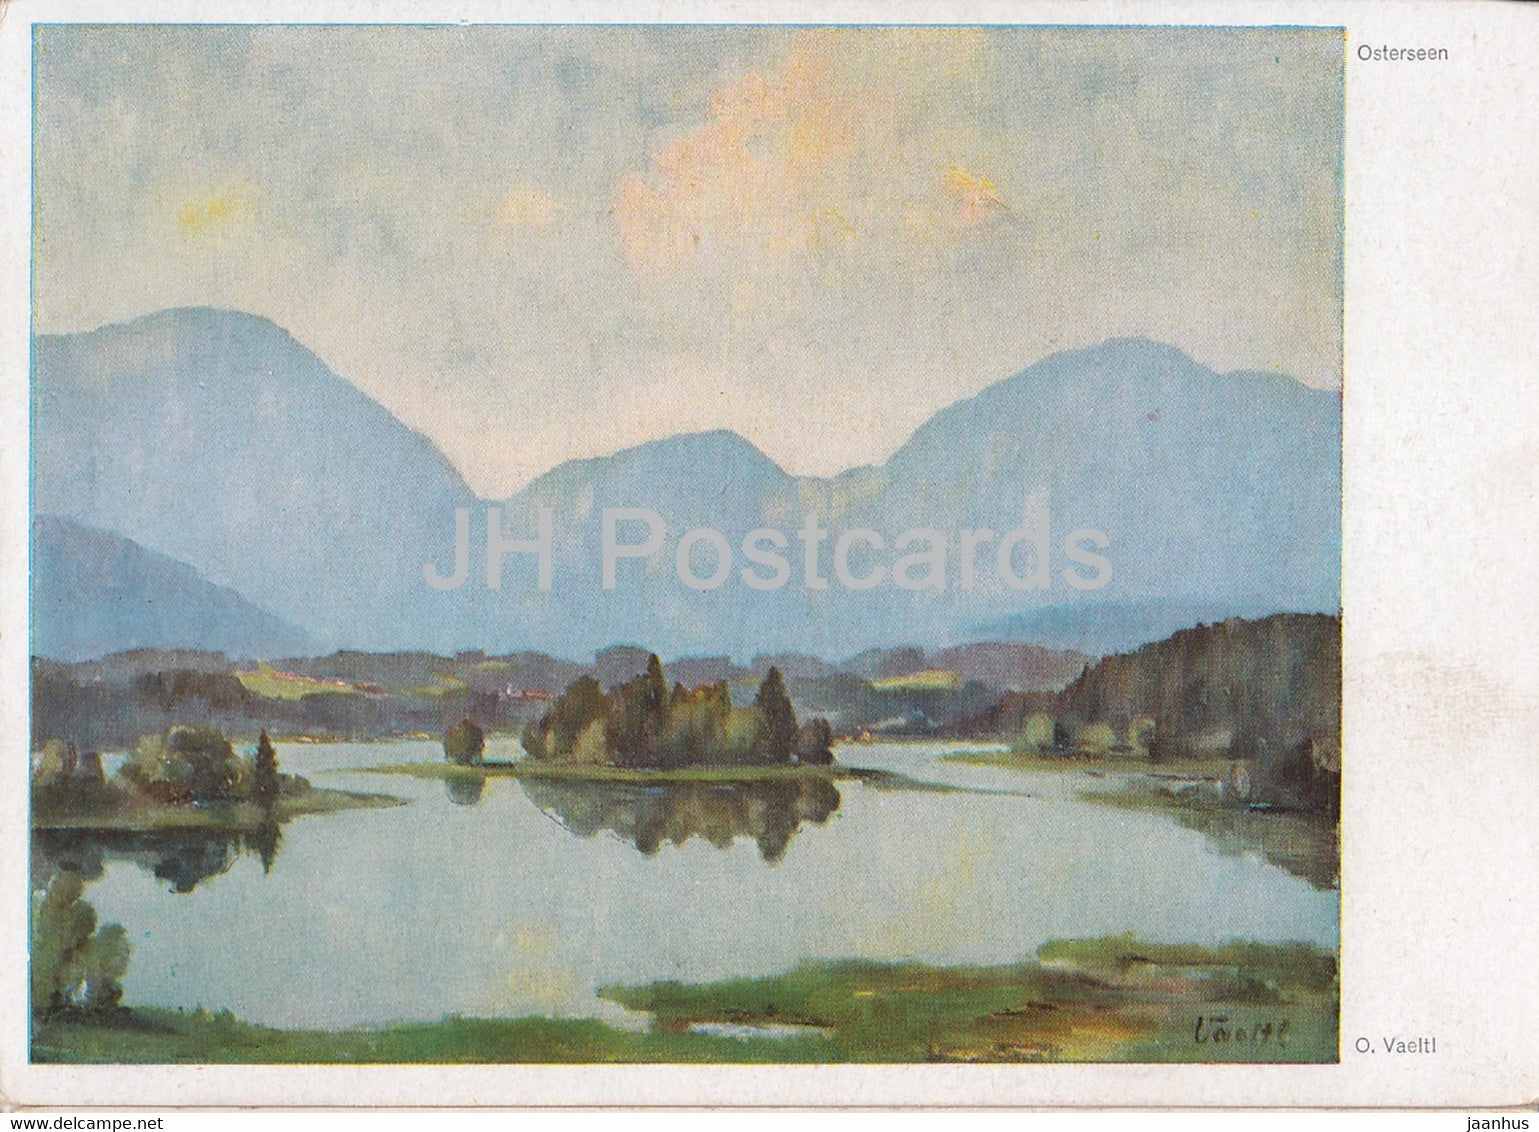 painting by O. Vaeltl - Osterseen - German art - Germany - unused - JH Postcards